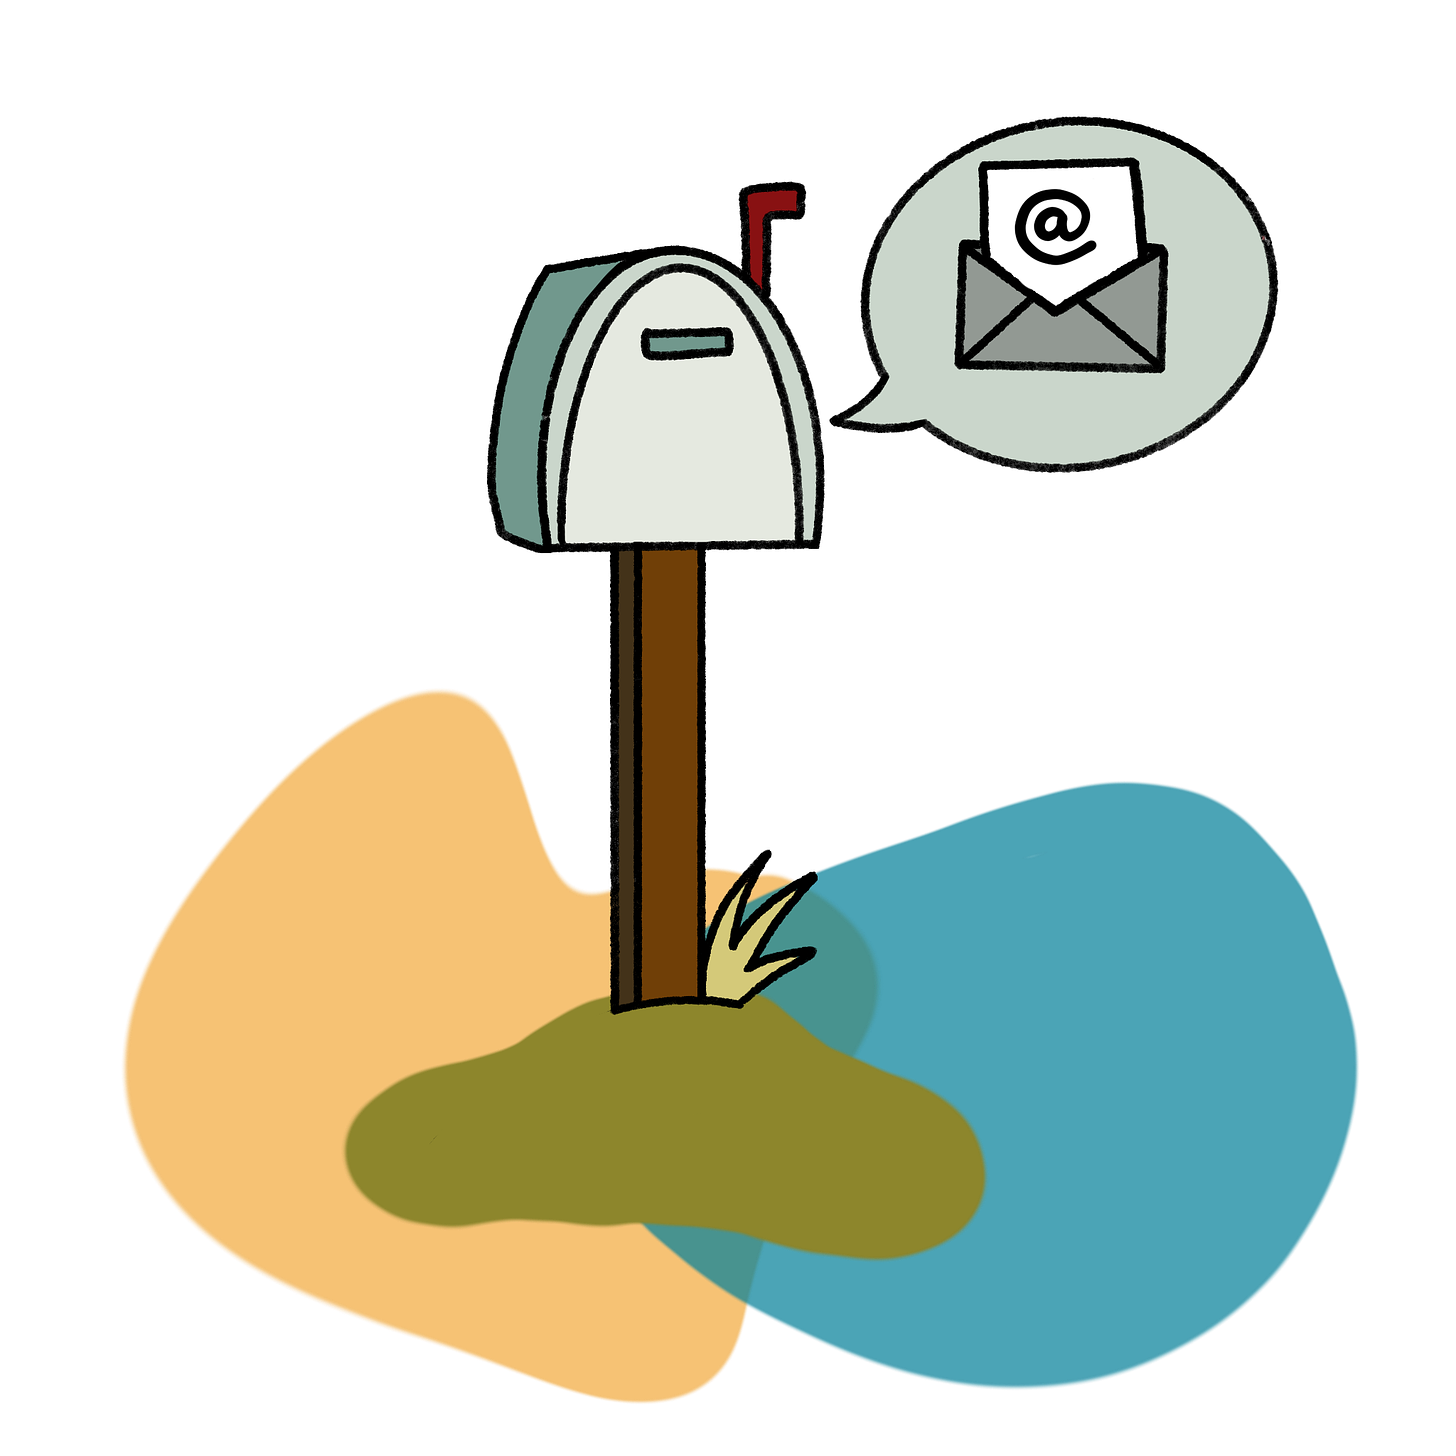 Illustration of a mailbox with an email symbol pop-up. Illustration by Manon Verchot.